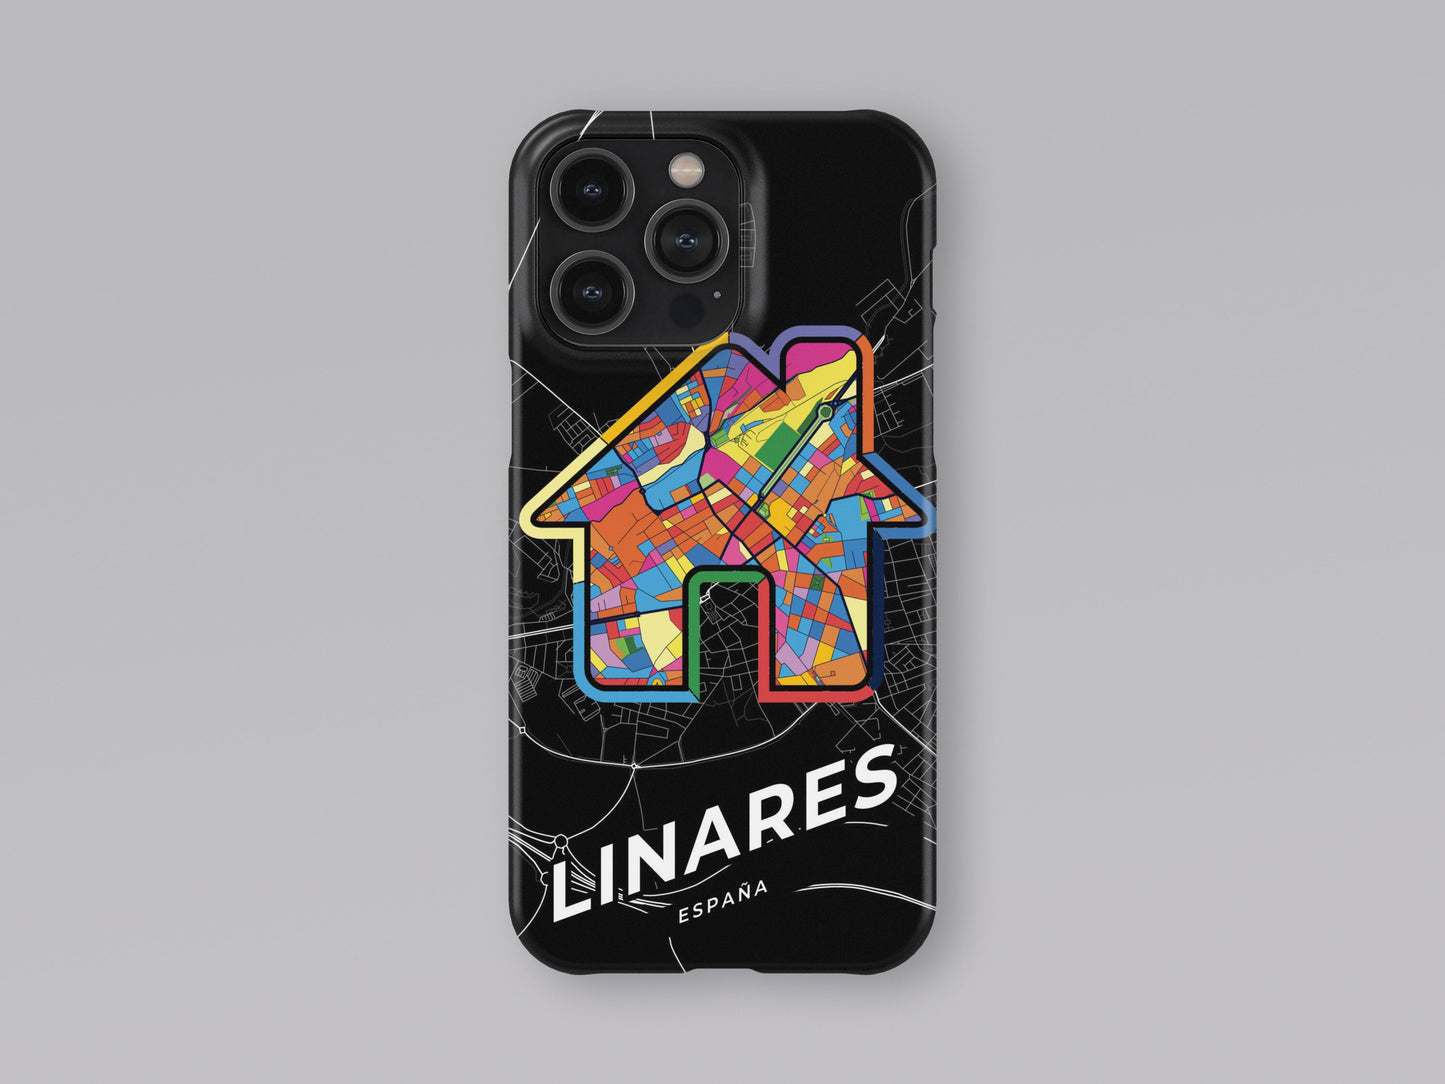 Linares Spain slim phone case with colorful icon. Birthday, wedding or housewarming gift. Couple match cases. 3